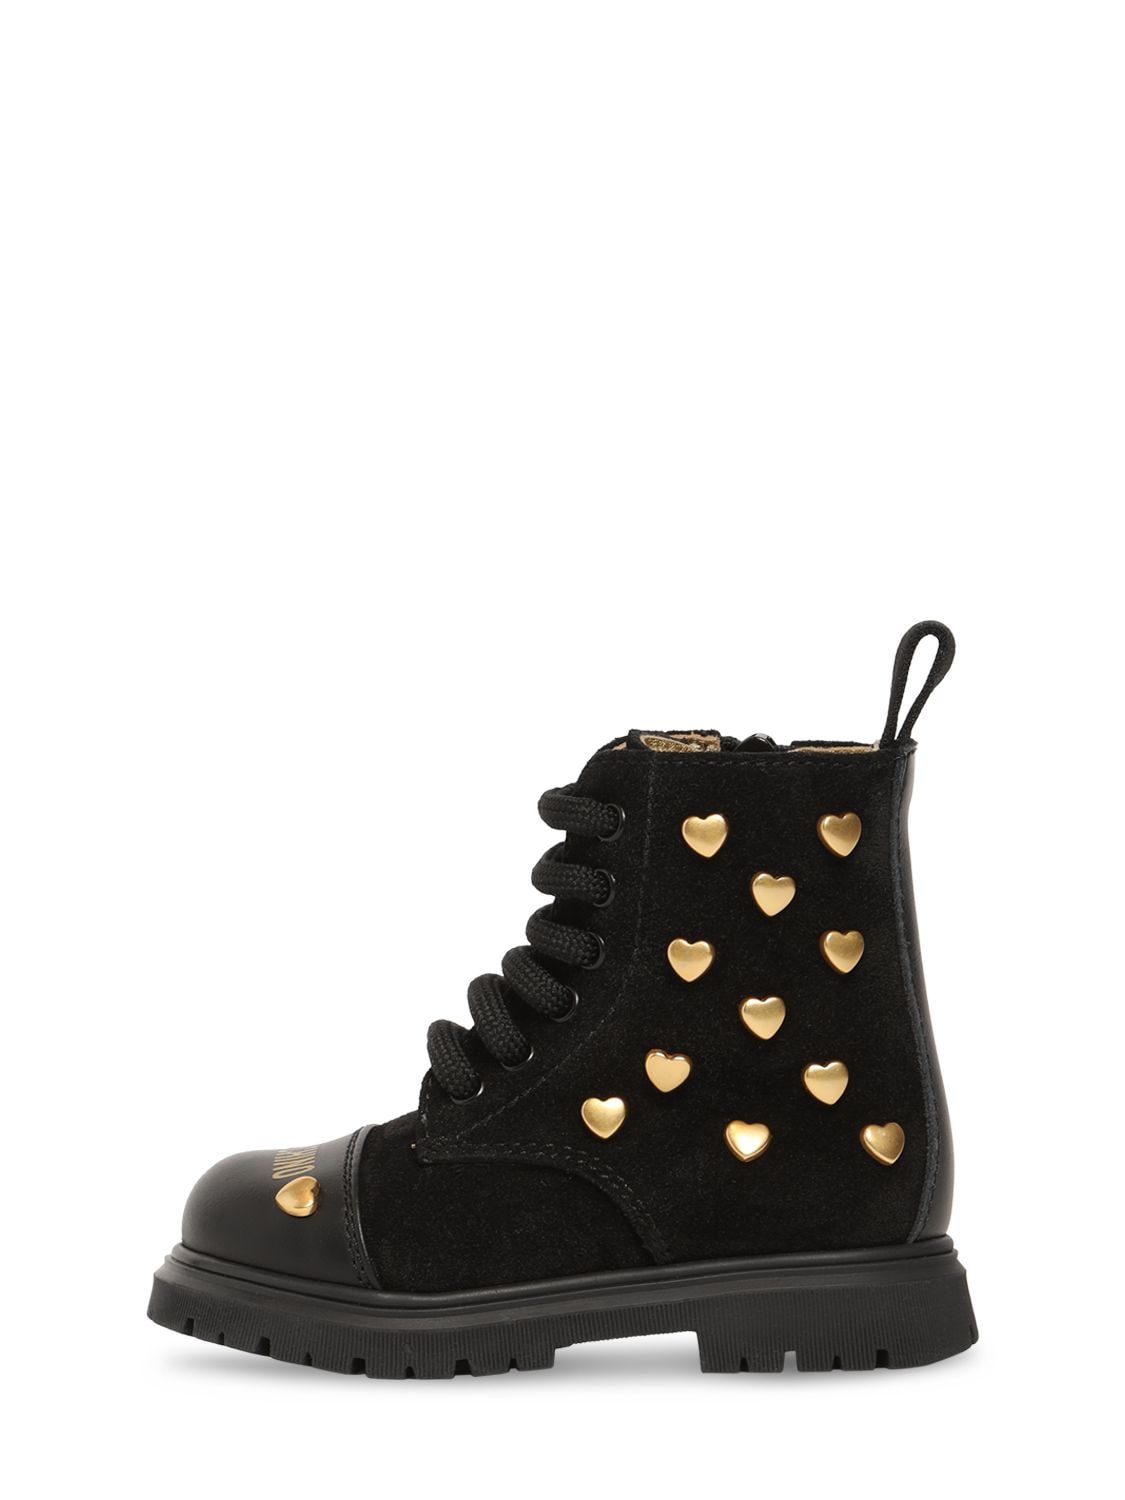 Moschino Kids' Suede Boots W/hearts In Black